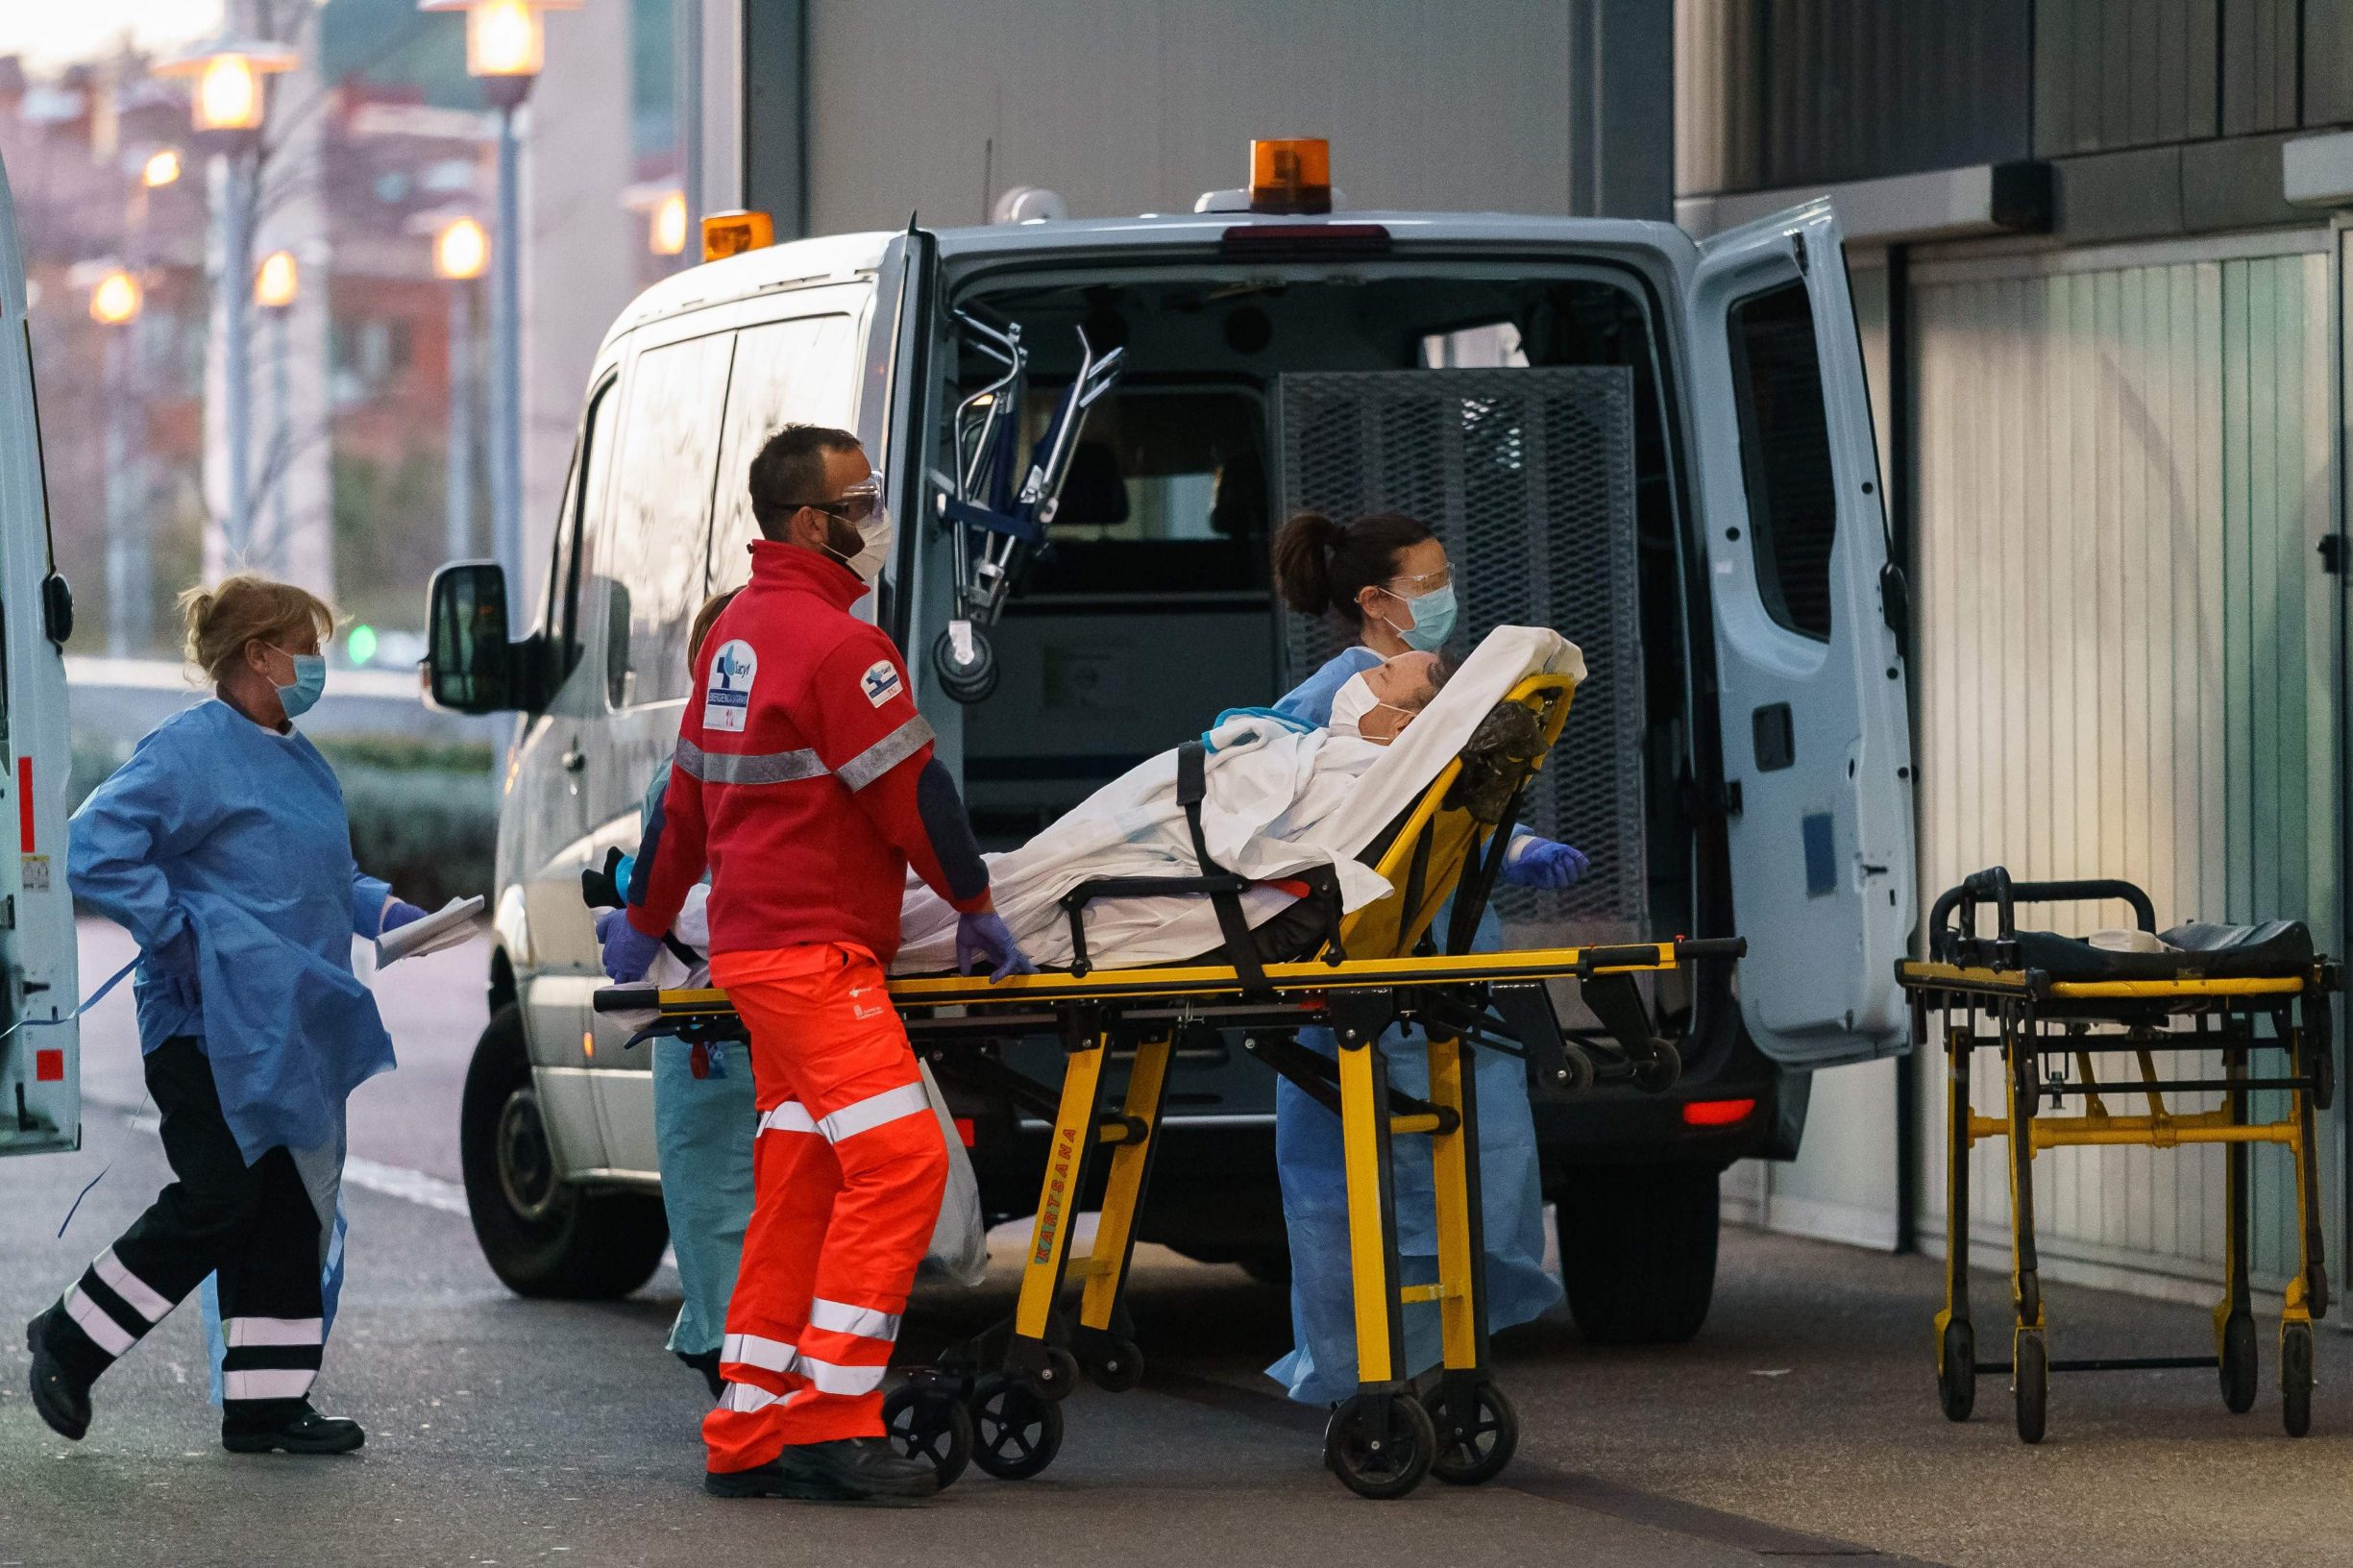 Paramedics wheel a patient into the Burgos general hospital in Burgos on March 25, 2020. - As the global death toll soared past 20,000, Spain joined Italy in seeing its number of fatalities overtake China, where the virus first emerged just three three months ago. (Photo by CESAR MANSO / AFP)